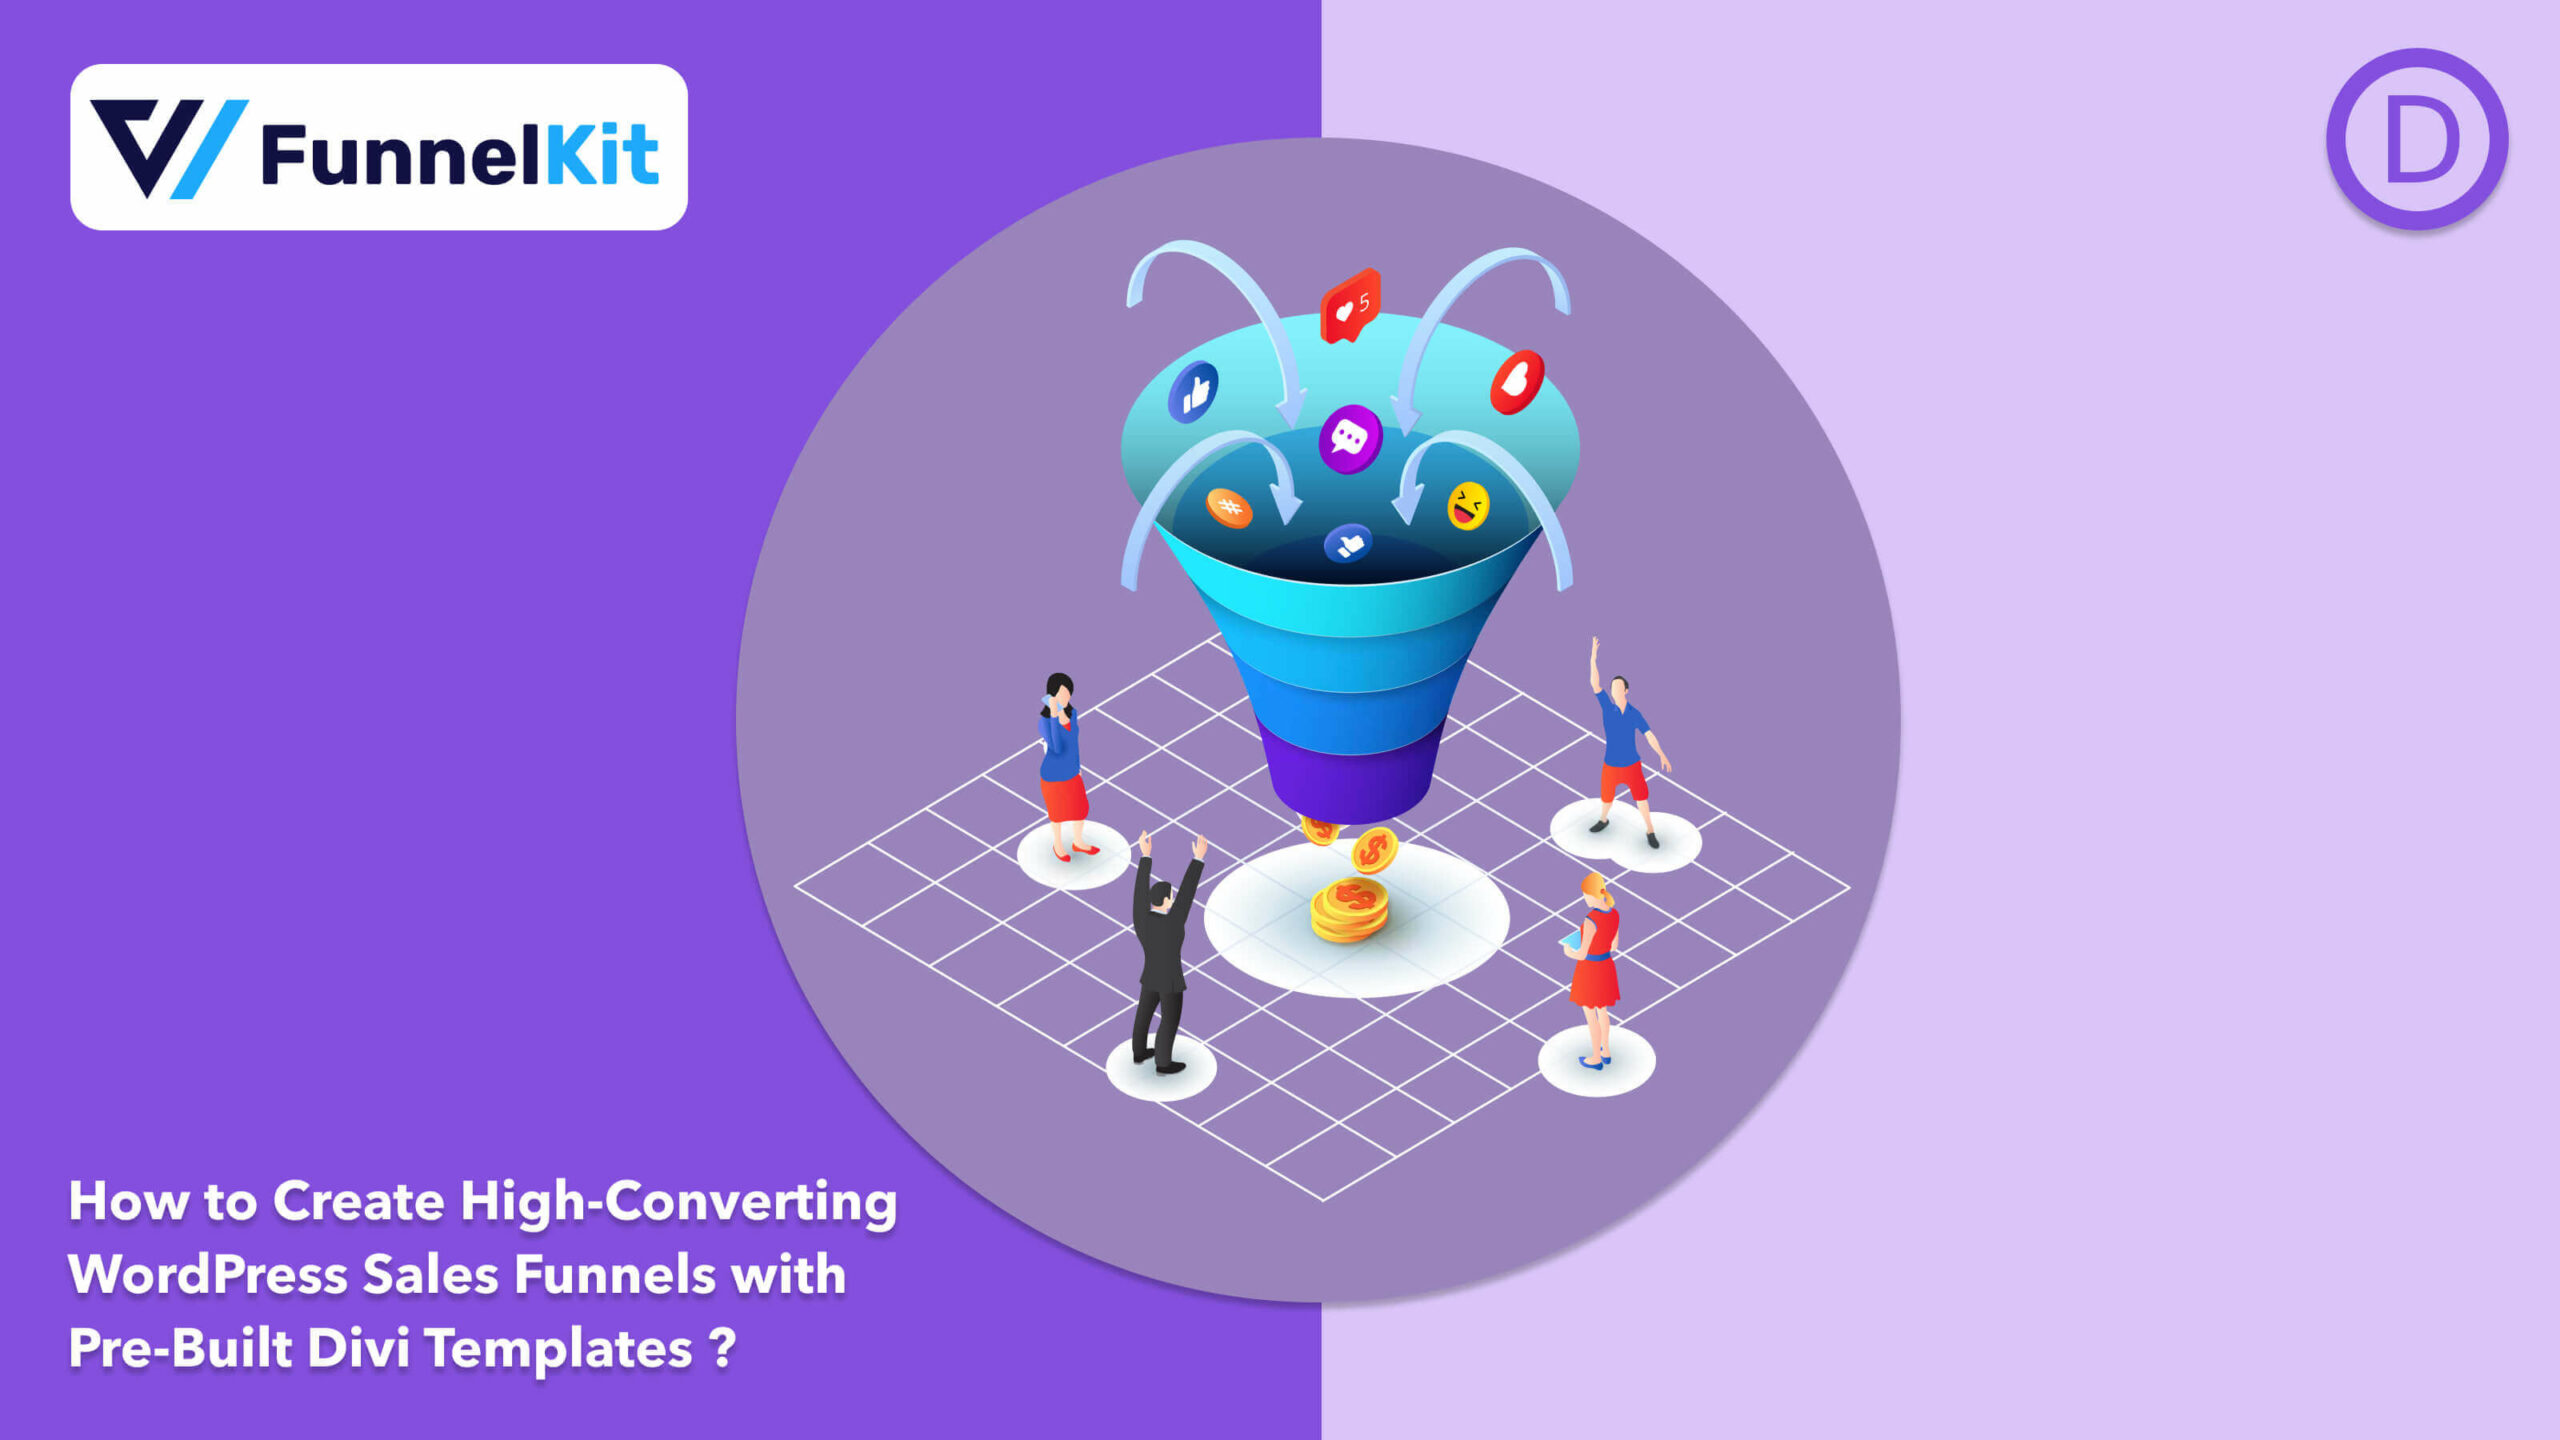 How to Create High-Converting WordPress Sales Funnels with Pre-Built Divi Templates